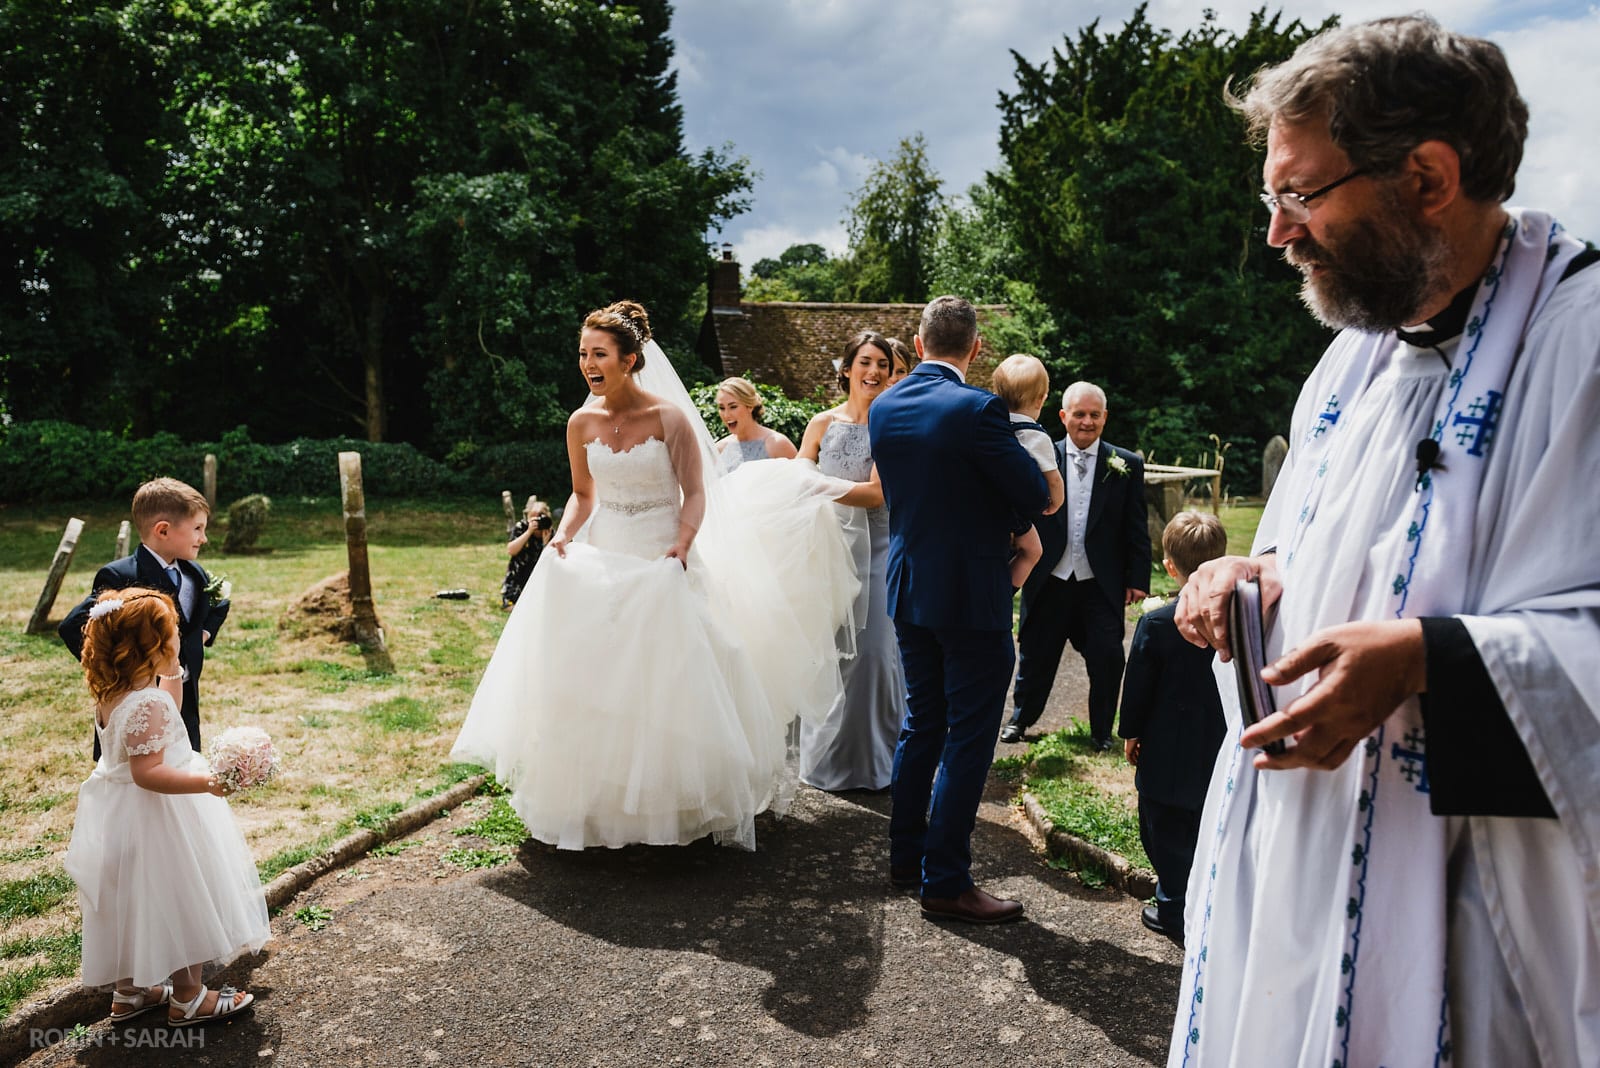 Bride greets flowergirl and pageboys outside church as vicar looks on